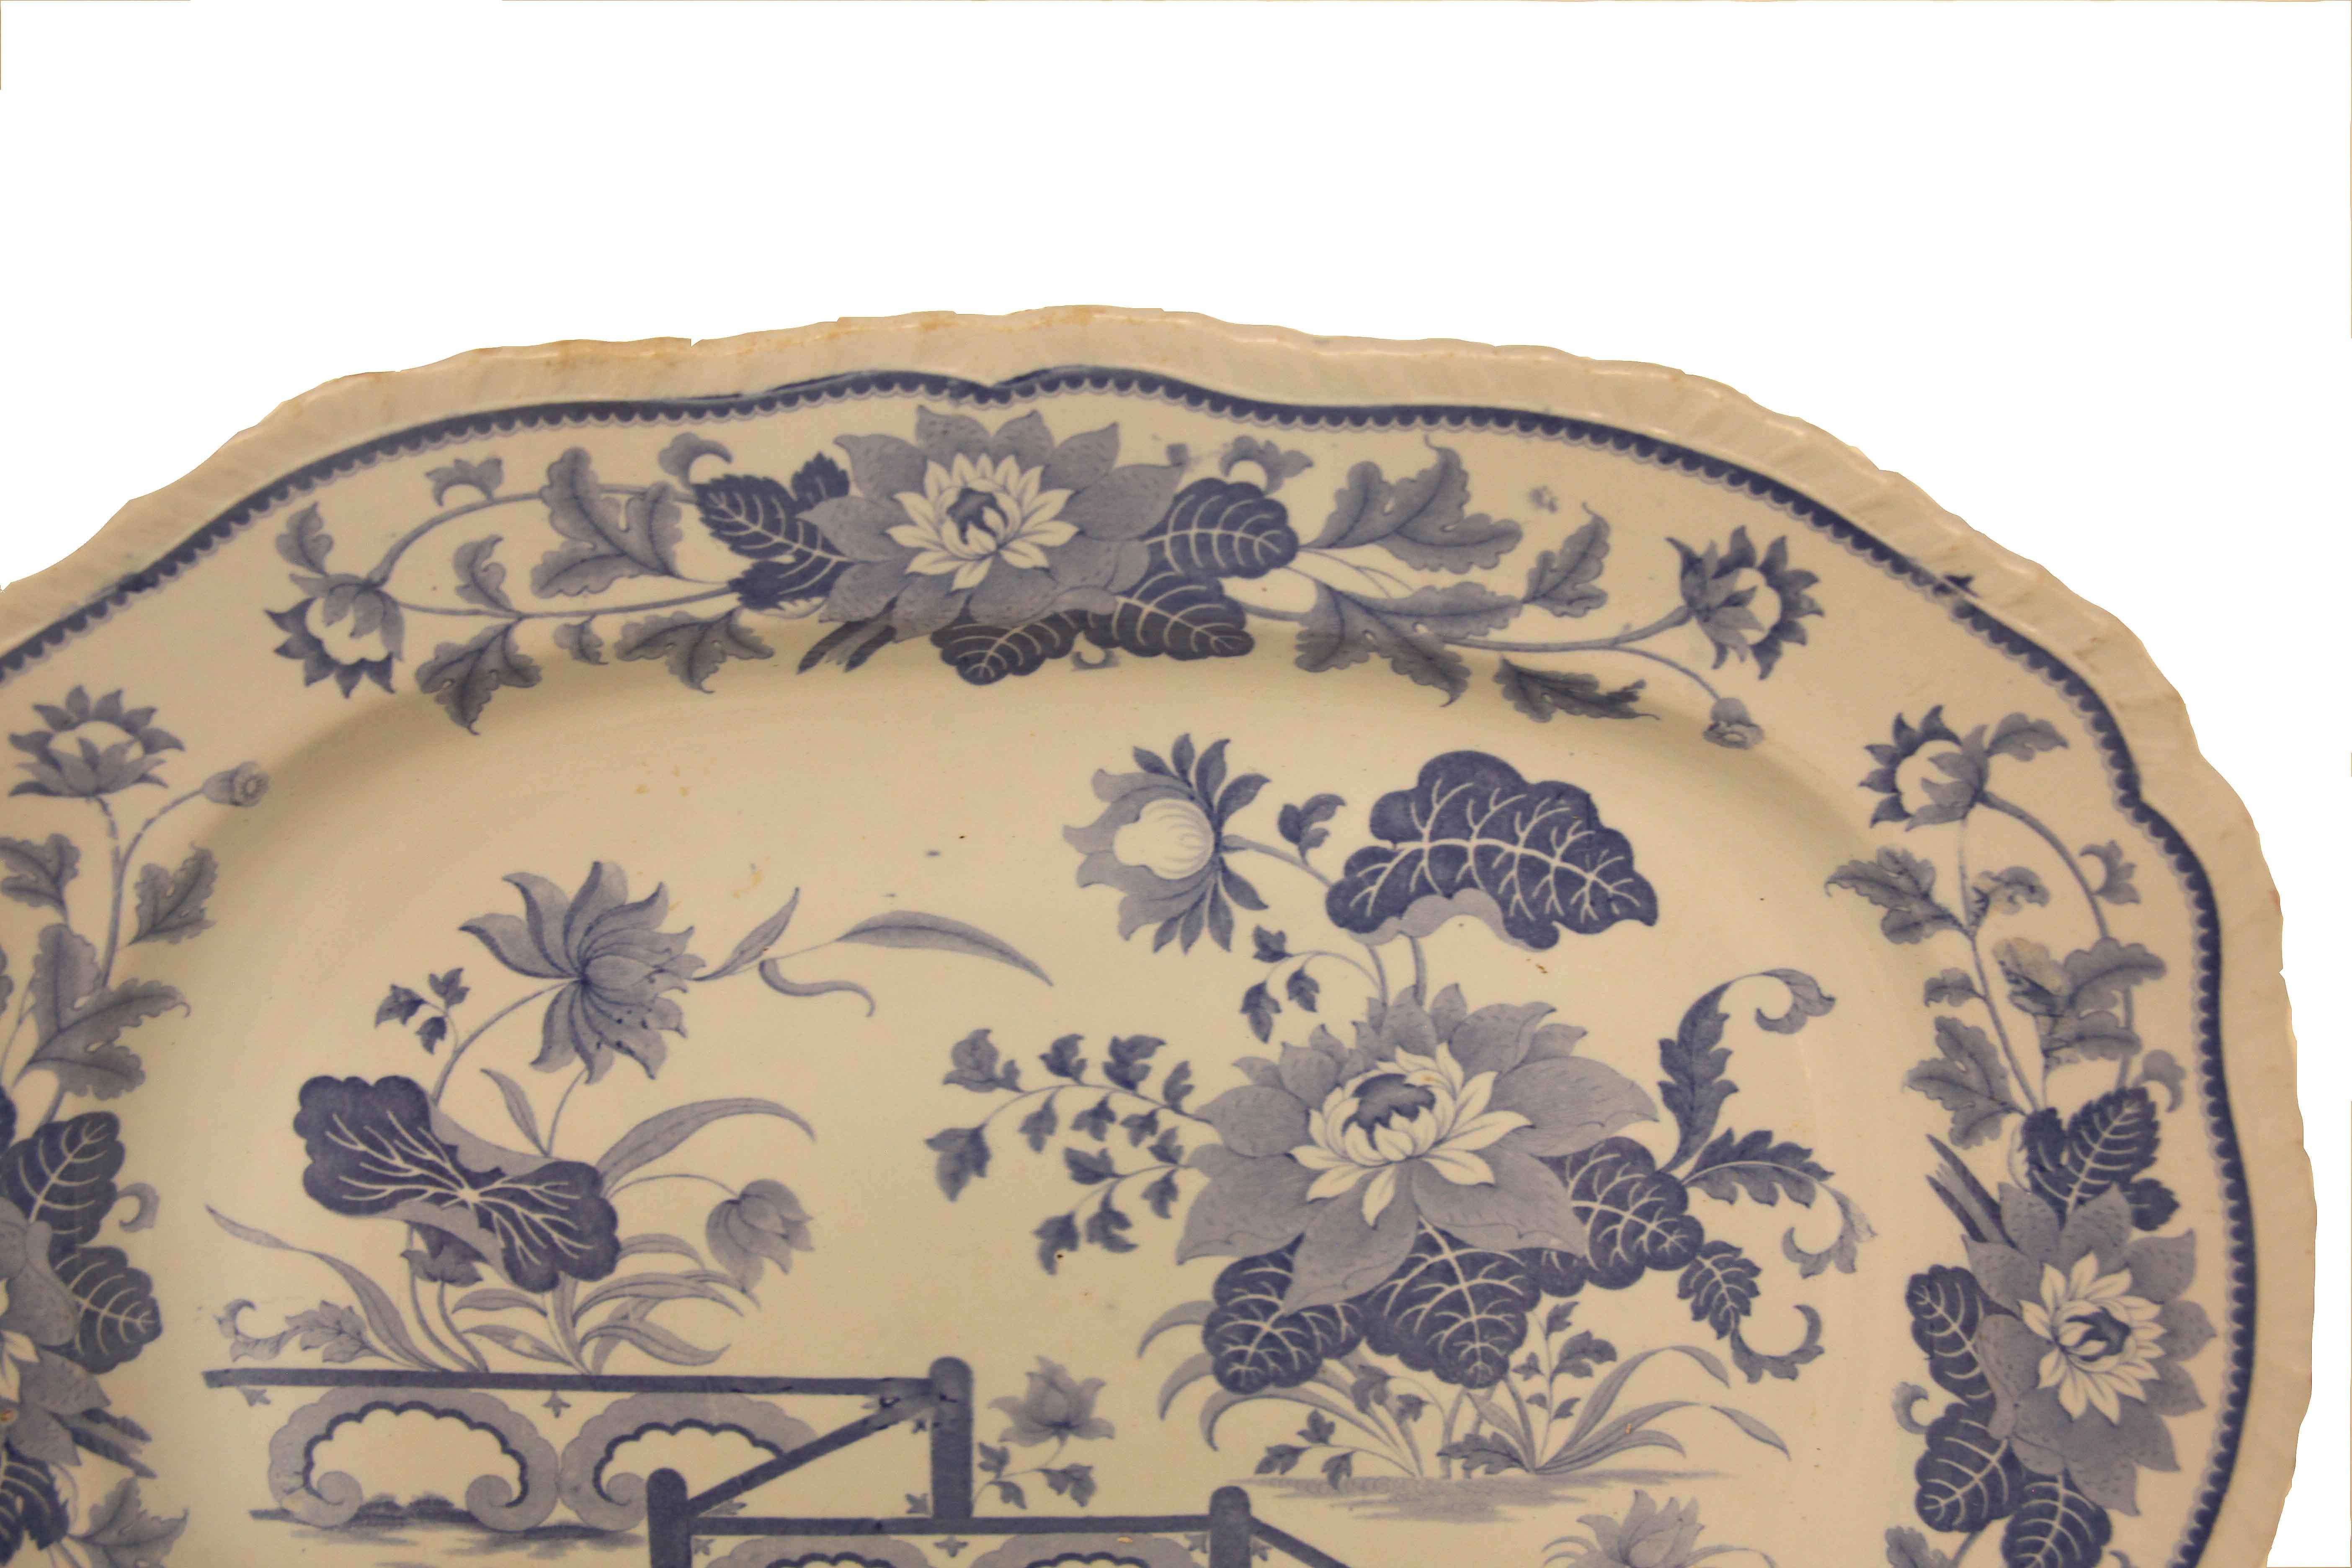 Blue and white ironstone platter, the rim has an undulating shape with ''ribbing'' along the edge,  the inner border has a repeating design of a central flower and foliate with trailing foliate and flowers on each end.  The main body features larger